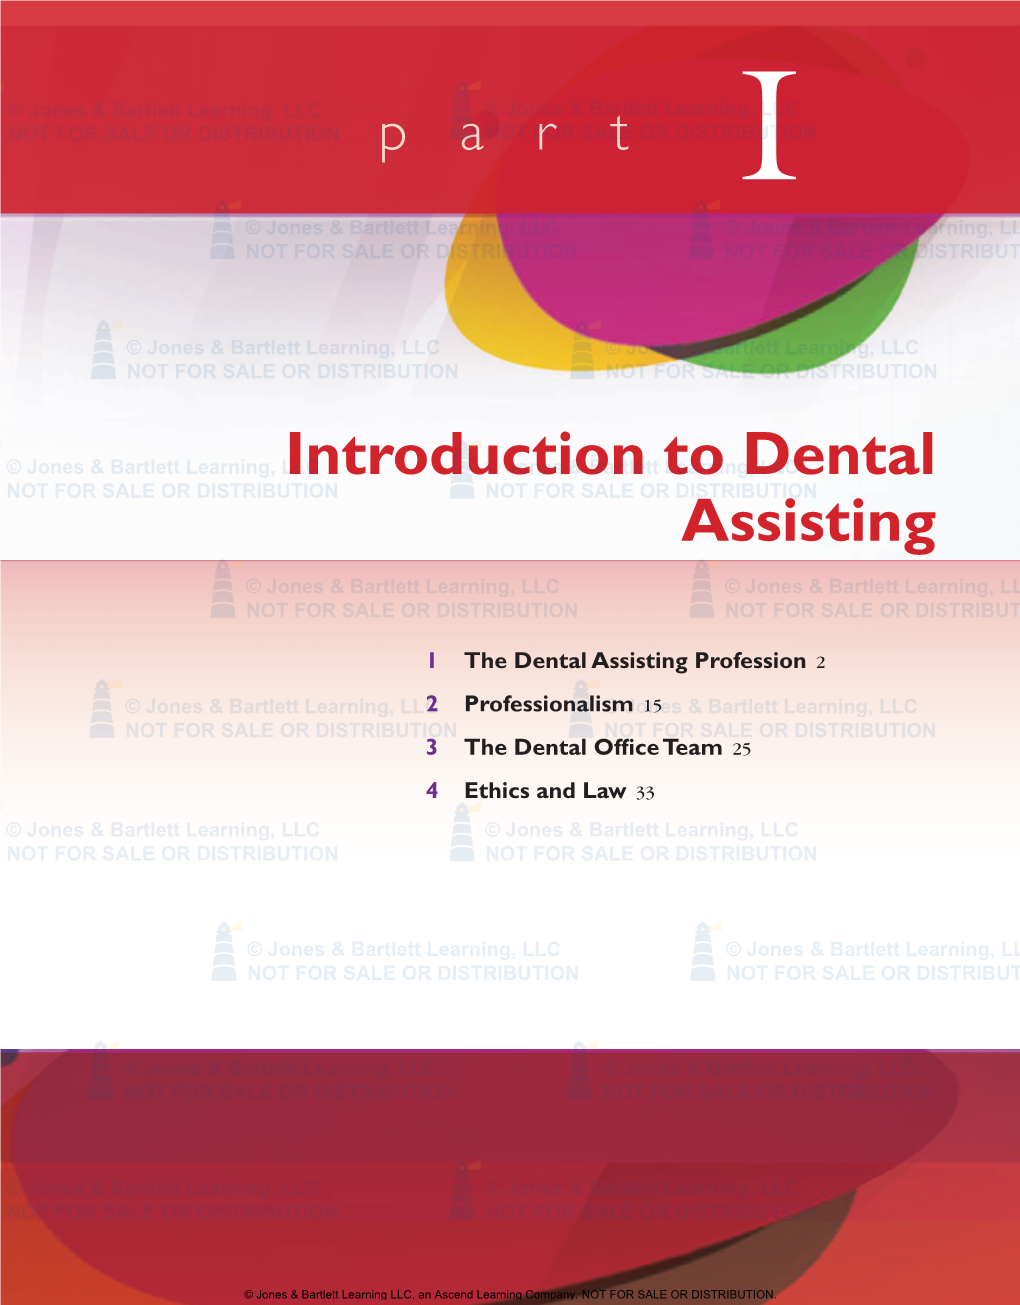 Introduction to Dental Assisting